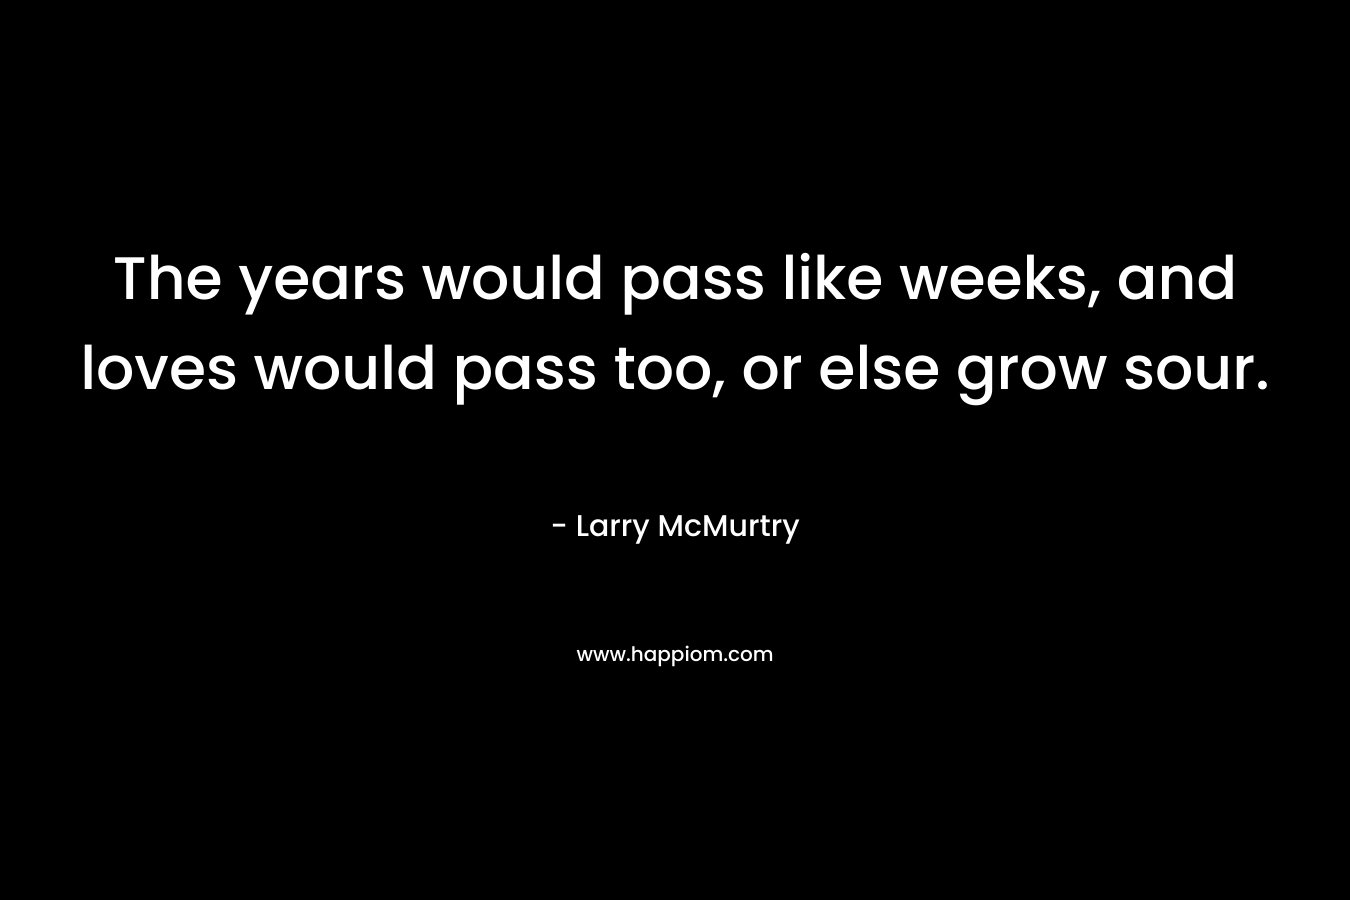 The years would pass like weeks, and loves would pass too, or else grow sour. – Larry McMurtry